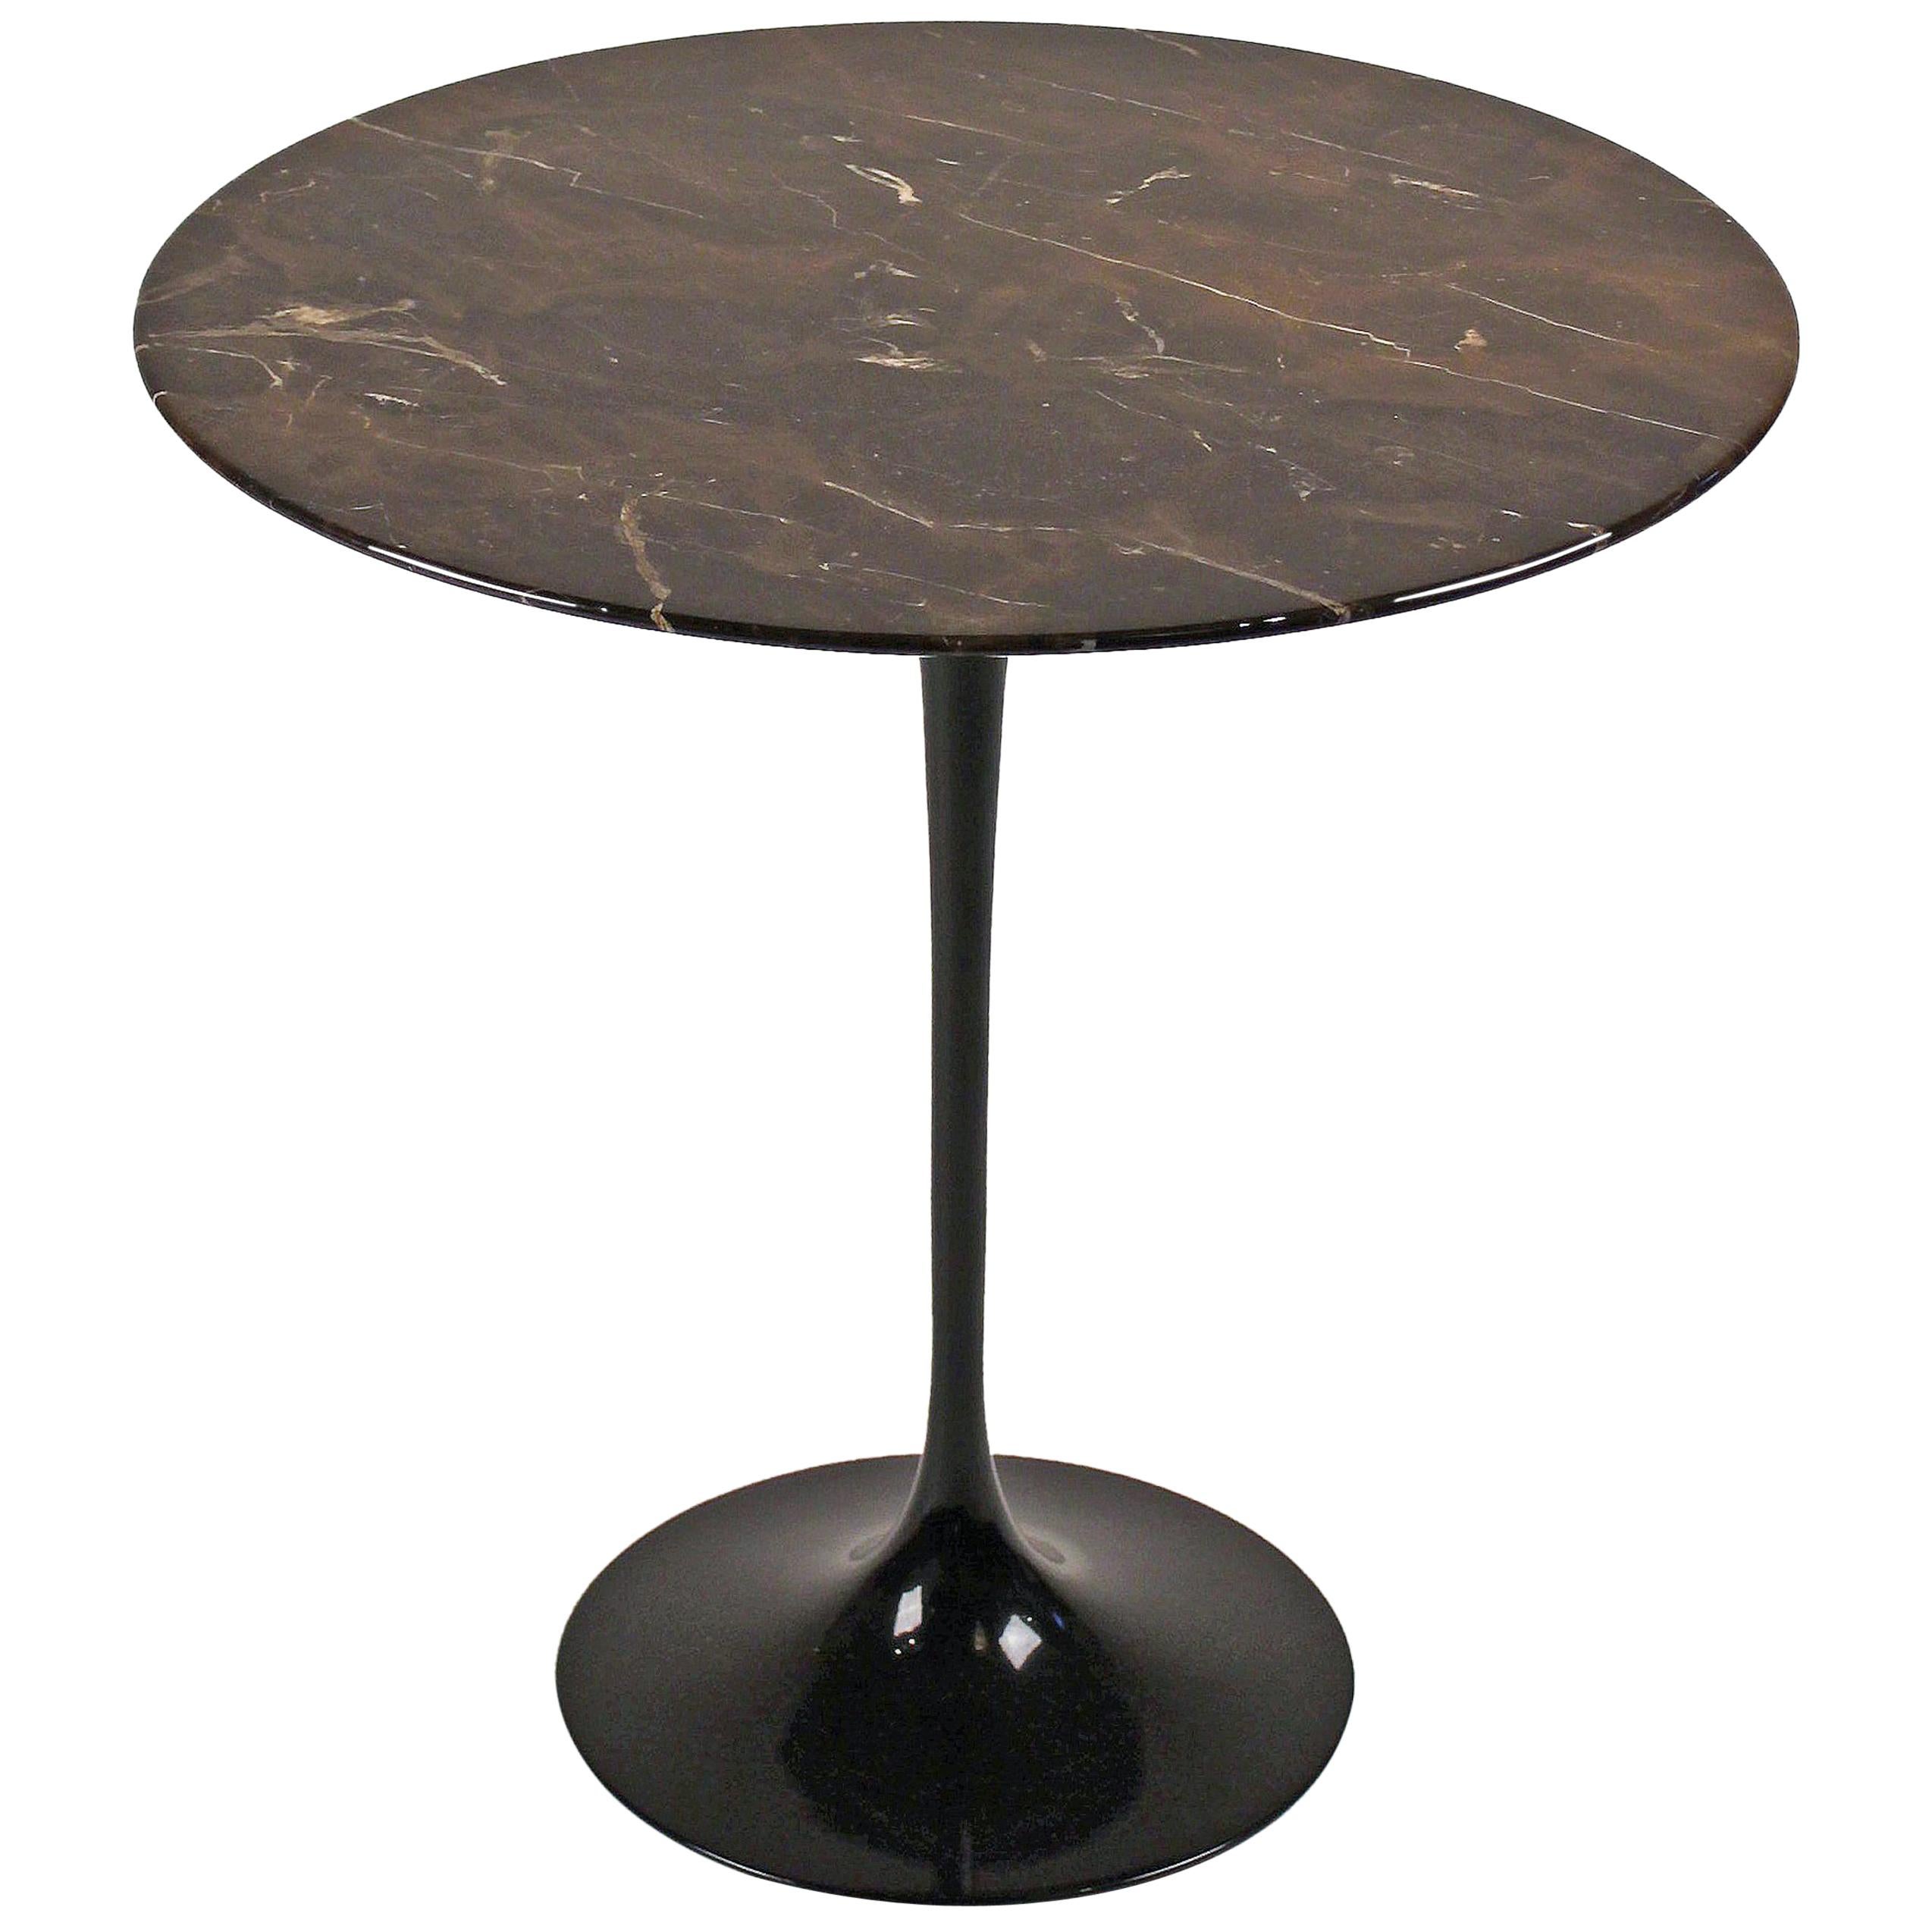 Eero Saarinen Side Table for Knoll with Polished Espresso Marble Top